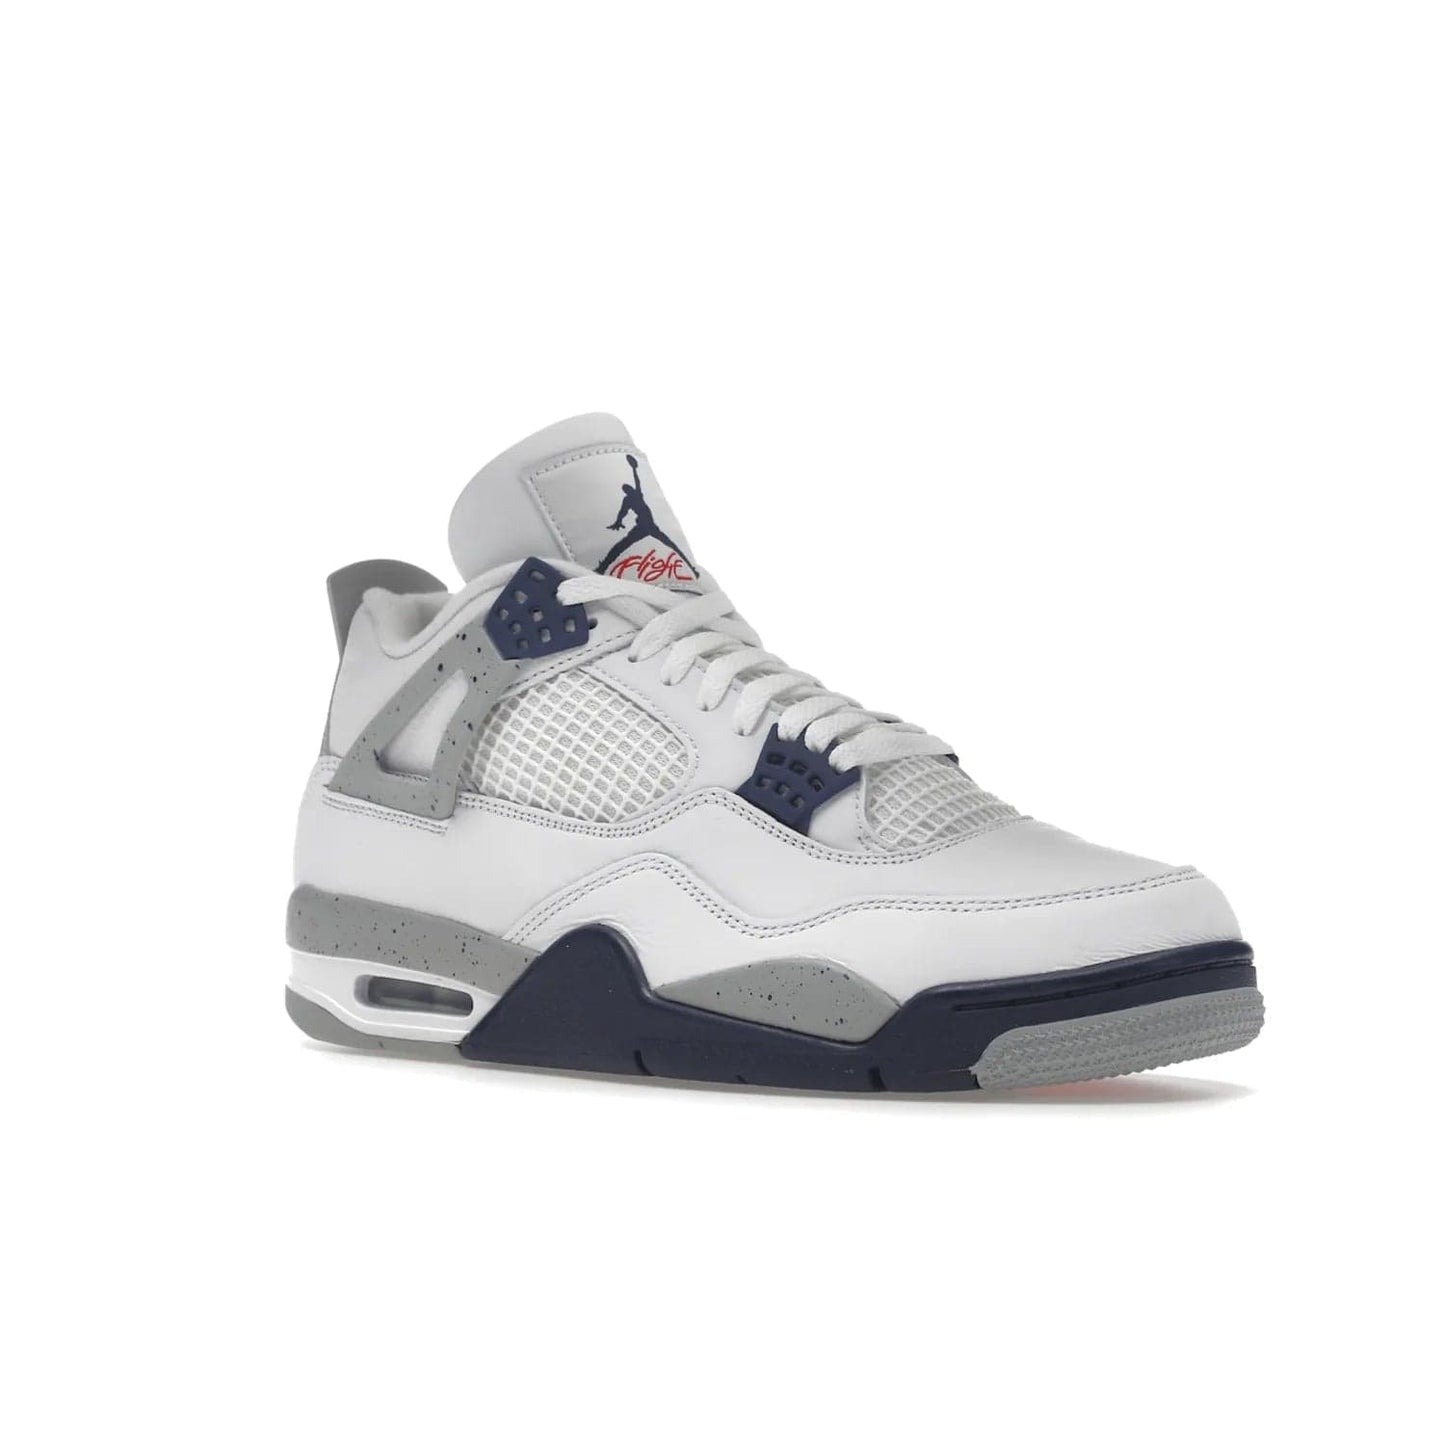 Jordan 4 Retro Midnight Navy - Image 5 - Only at www.BallersClubKickz.com - Shop the Air Jordan Retro 4 White Midnight Navy. Stand out with a classic white leather upper, black support wings, midnight navy eyelets, and Crimson Jumpman tongue tag. Unbeatable comfort with two-tone polyurethane midsole with encapsulated Air technology. Get yours before October 29th, 2022.